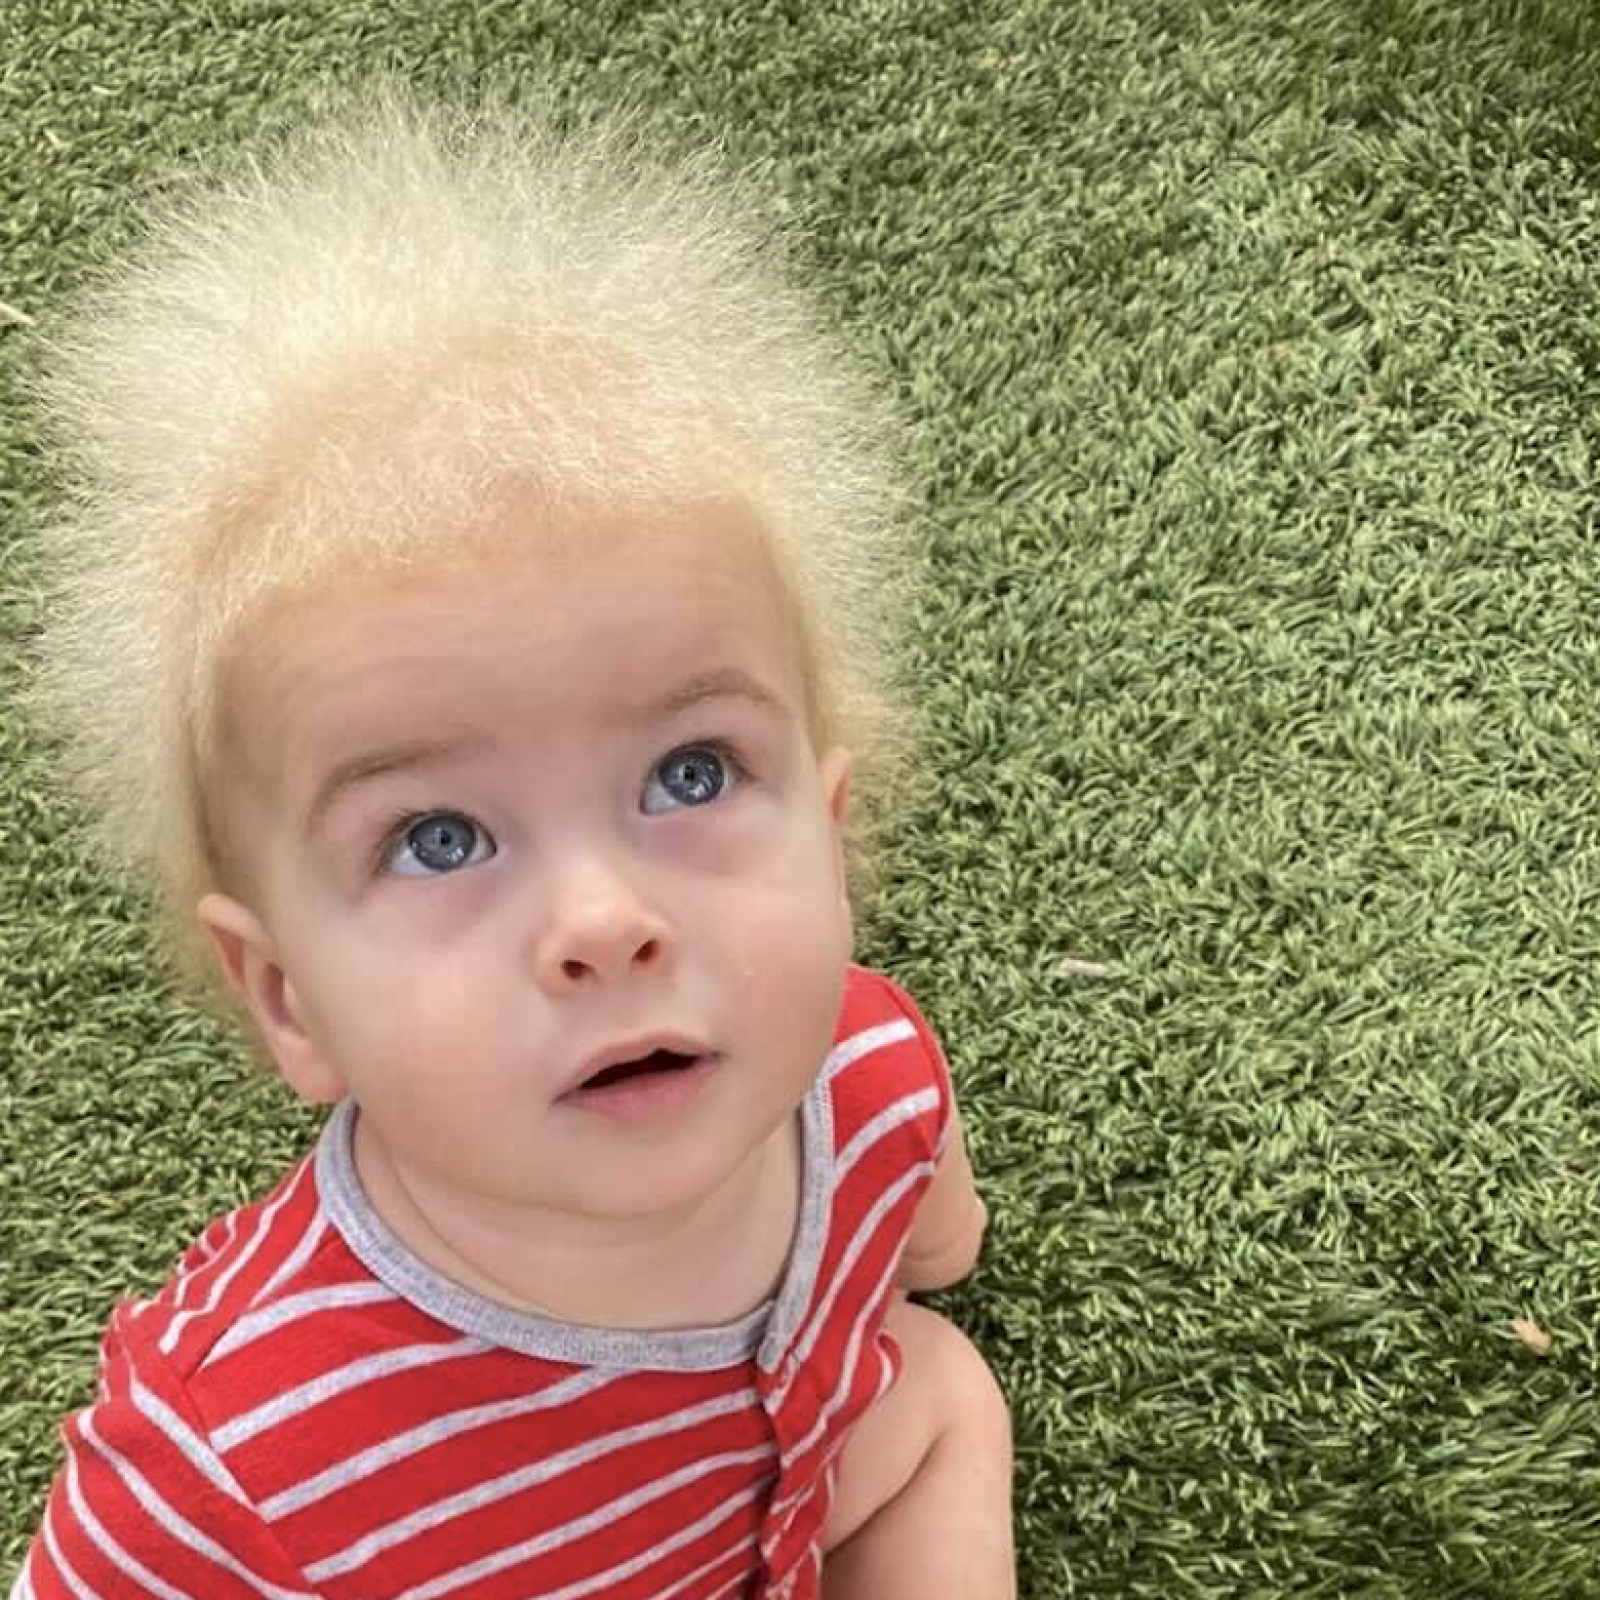 100 Confirmed Cases in the World': Boy Diagnosed With Rare Uncombable Hair  Syndrome